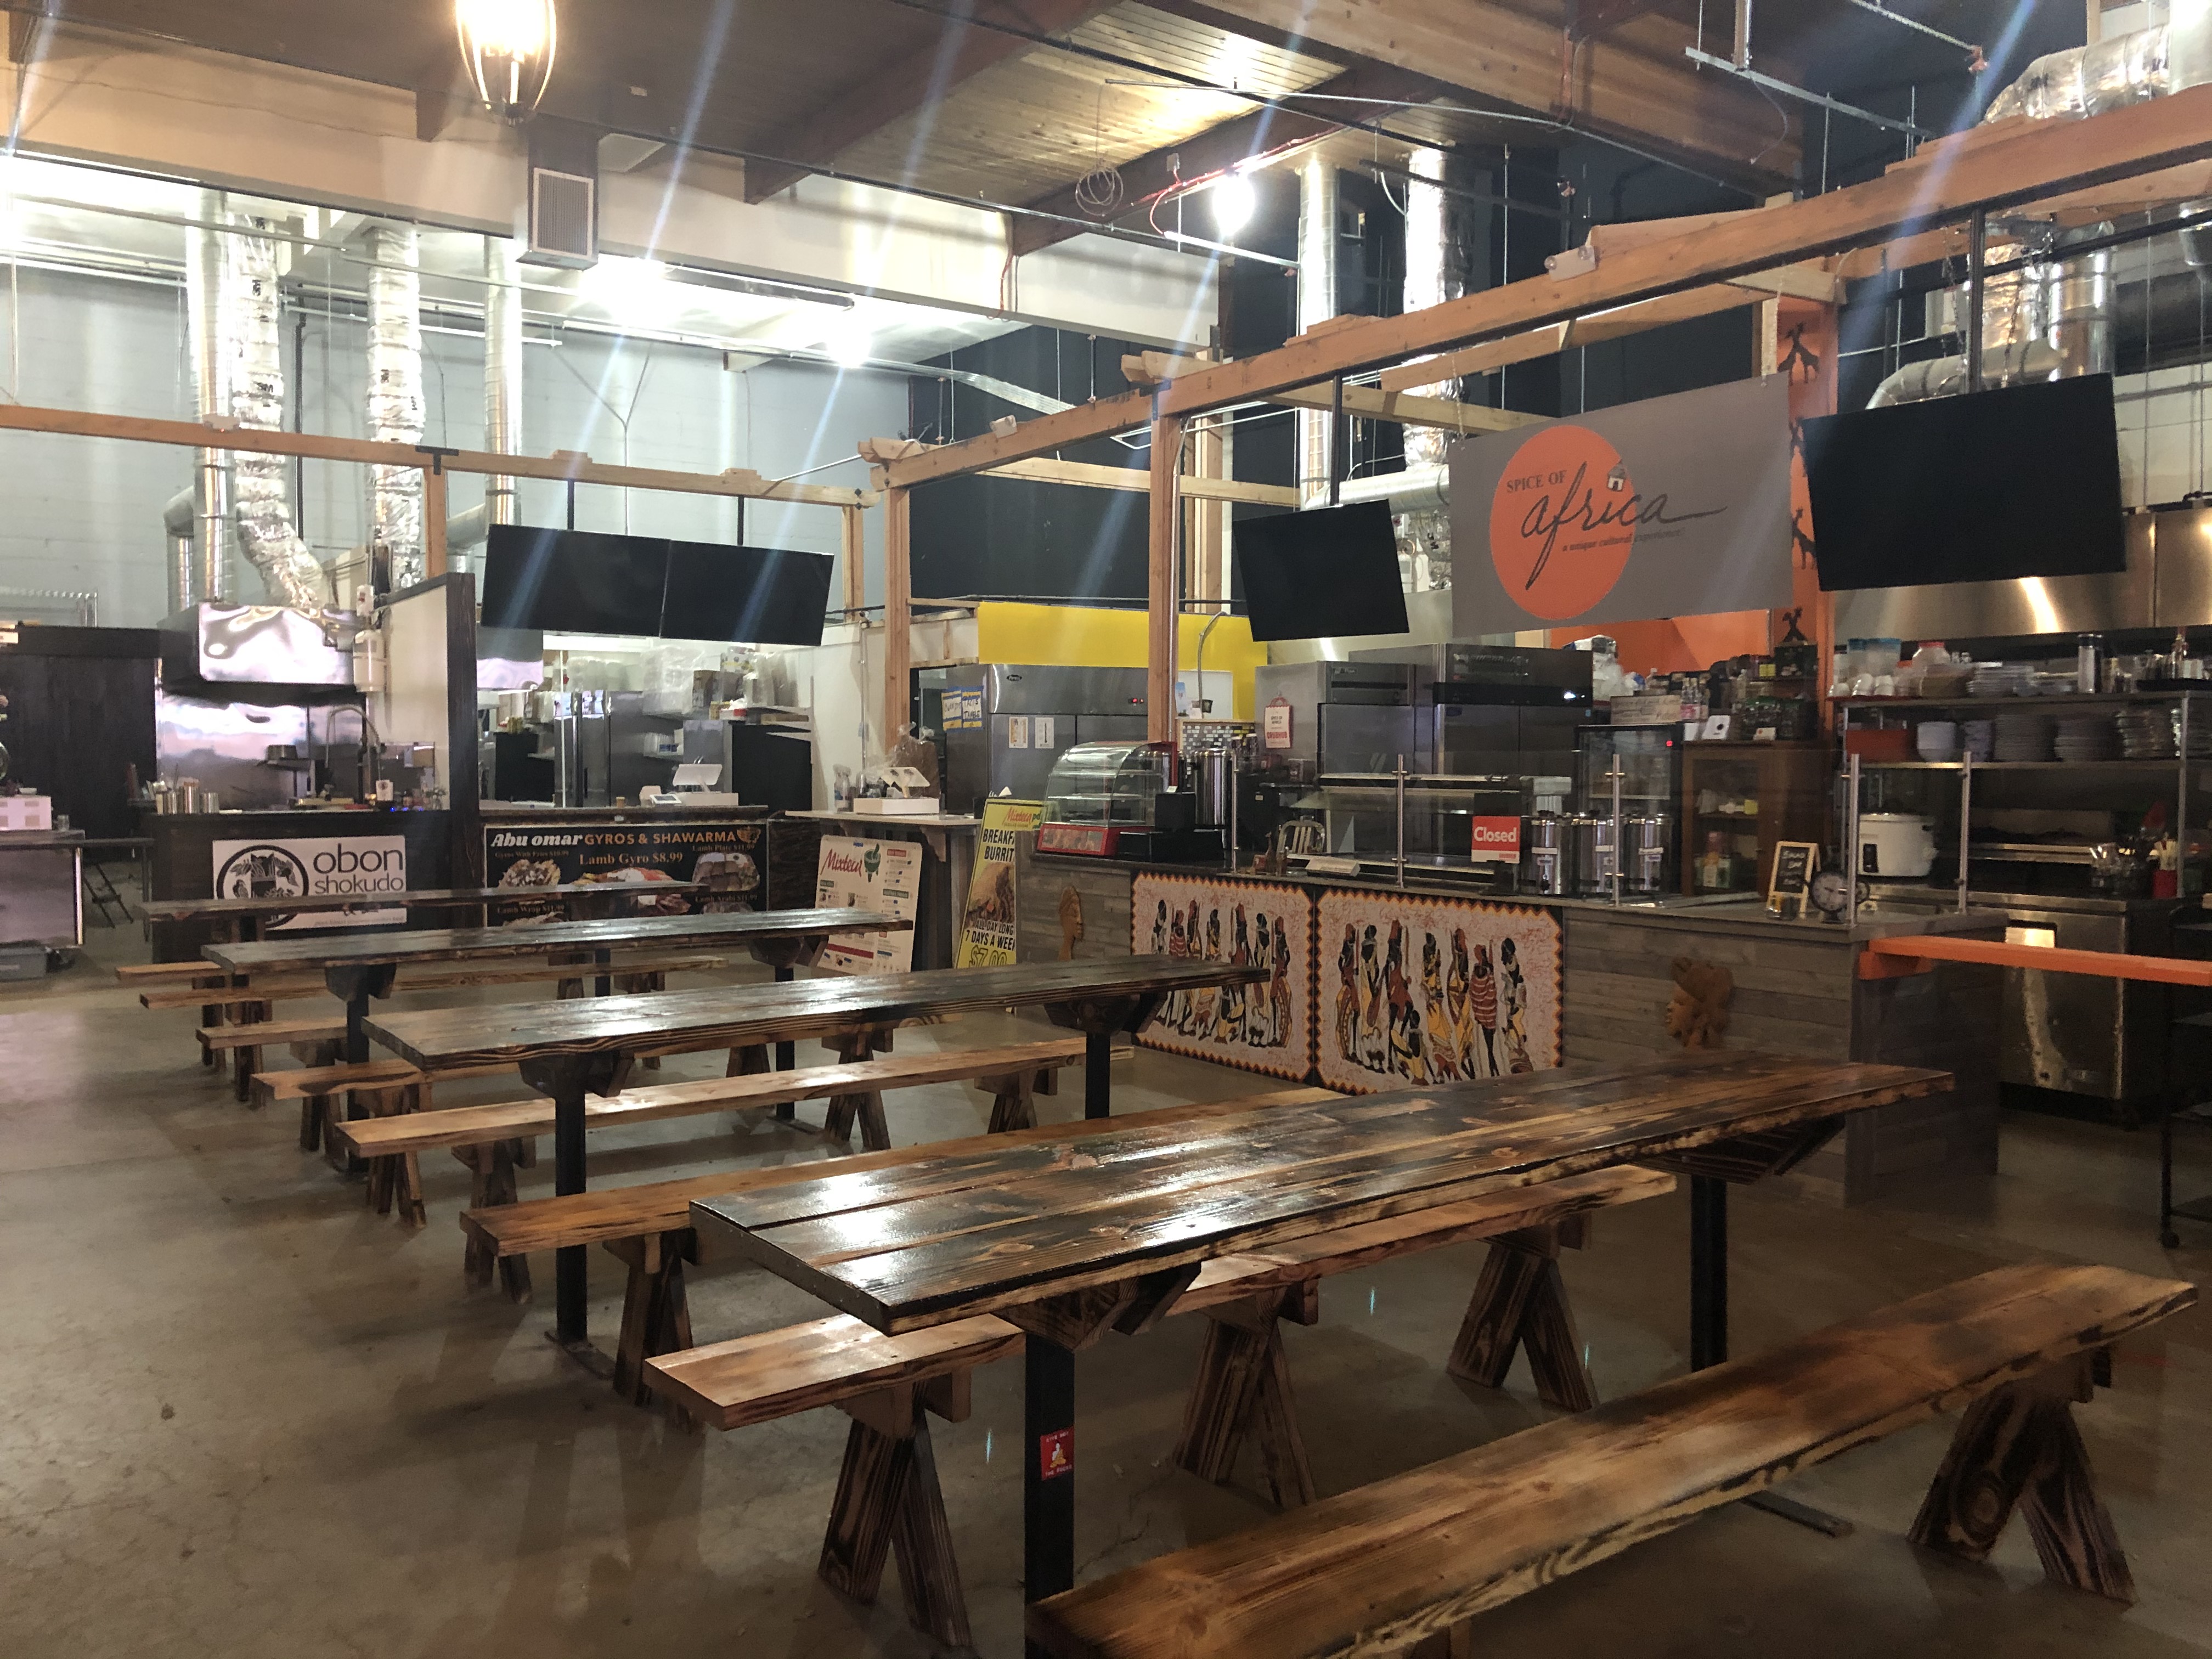 Picnic tables sit in the middle of an industrial, warehouse-like market. Stalls sit around the chairs and tables.